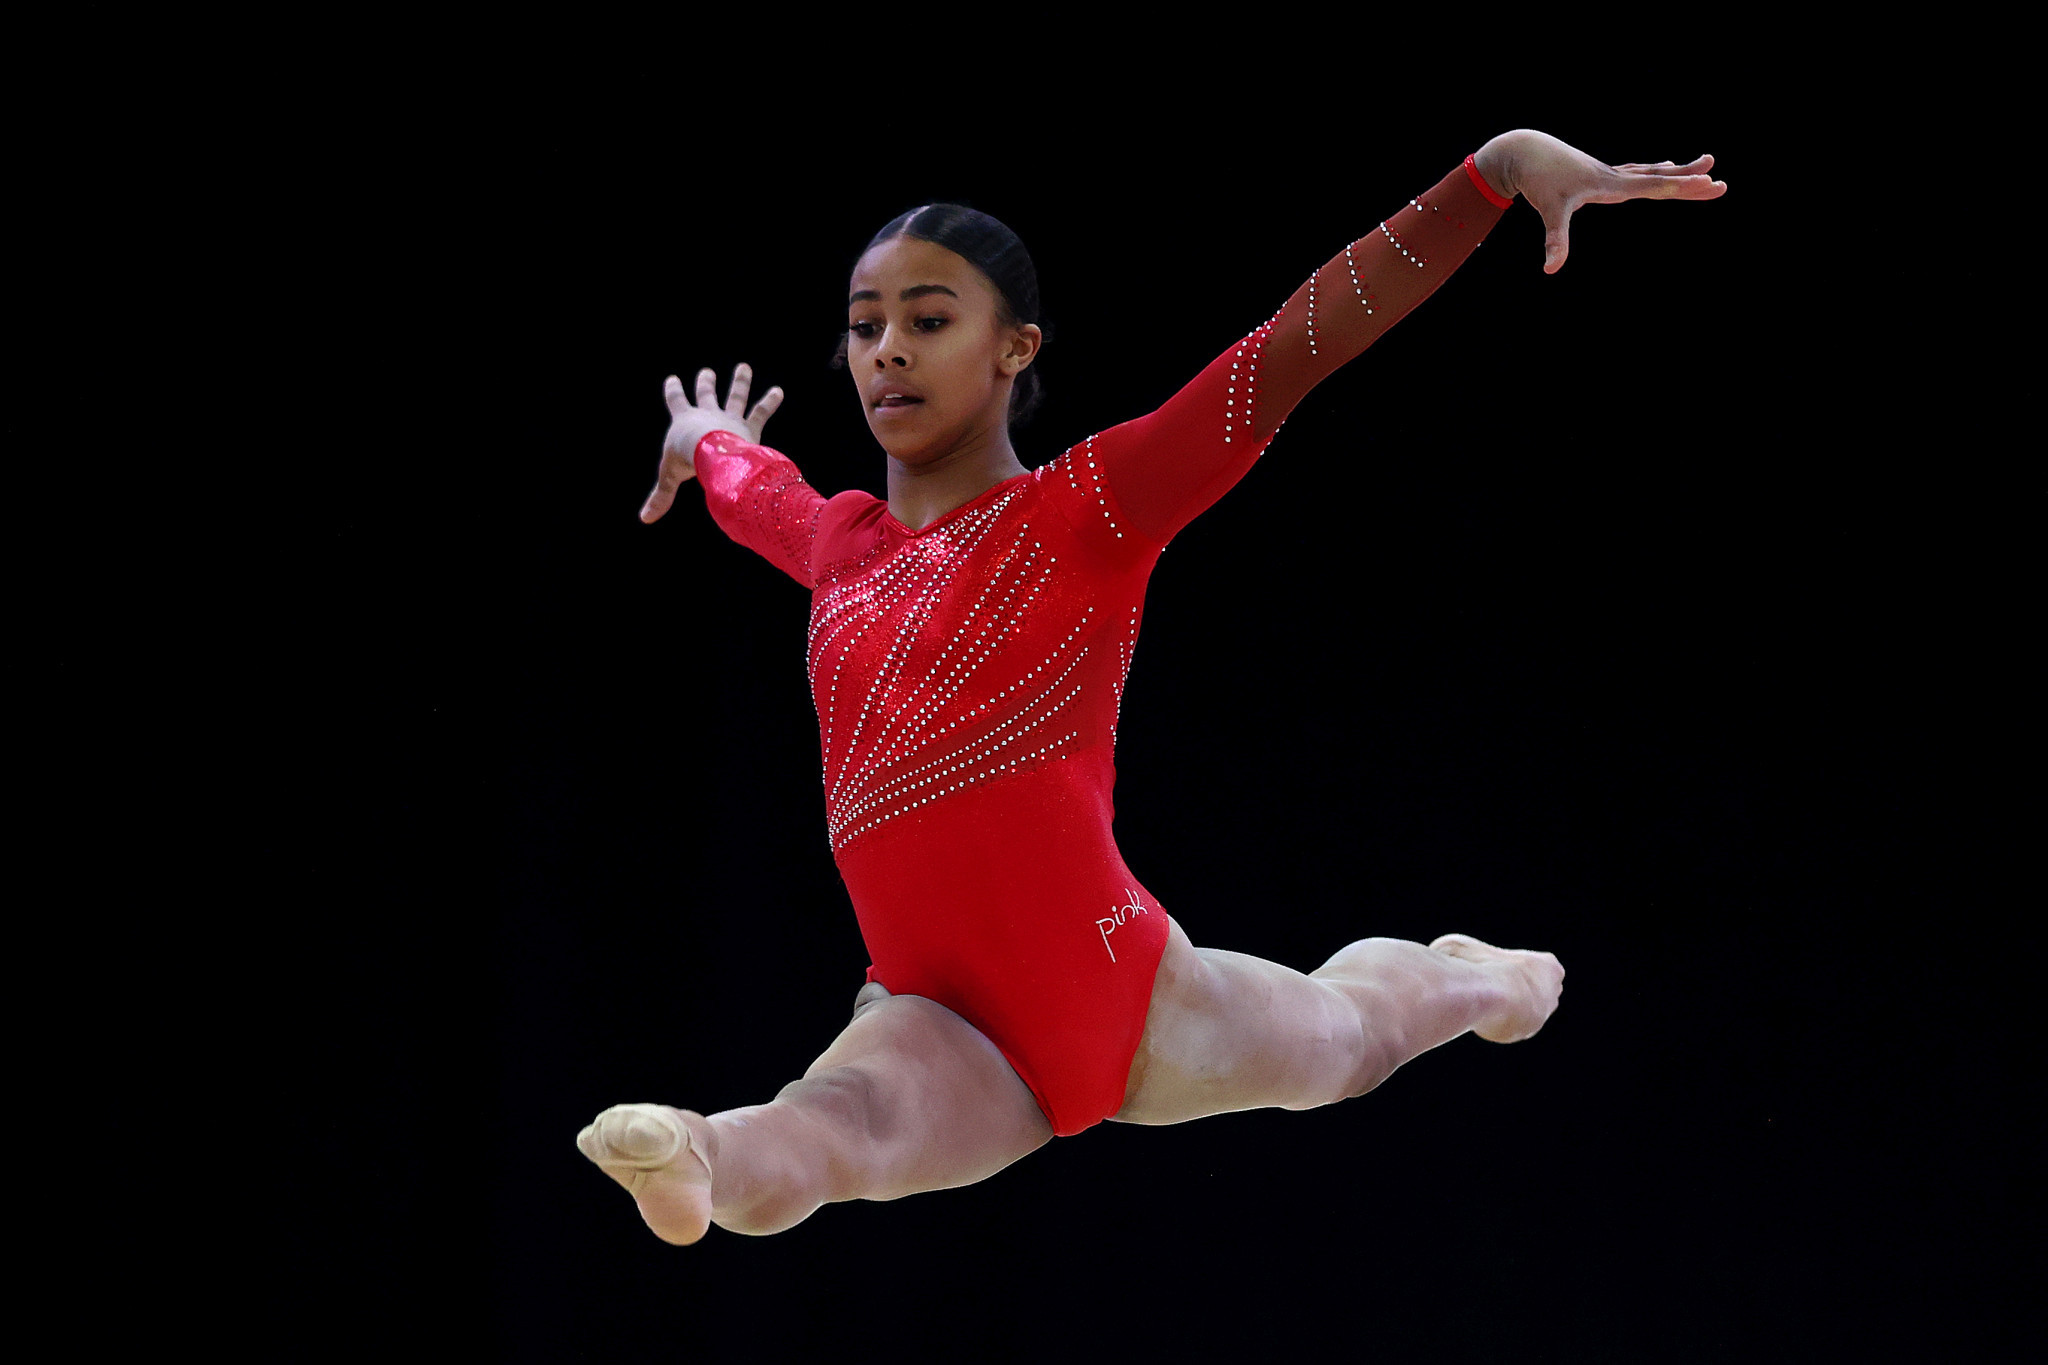 Amankwaah impressed in the juniors at the tournament in Rimini, Italy. GETTY IMAGES